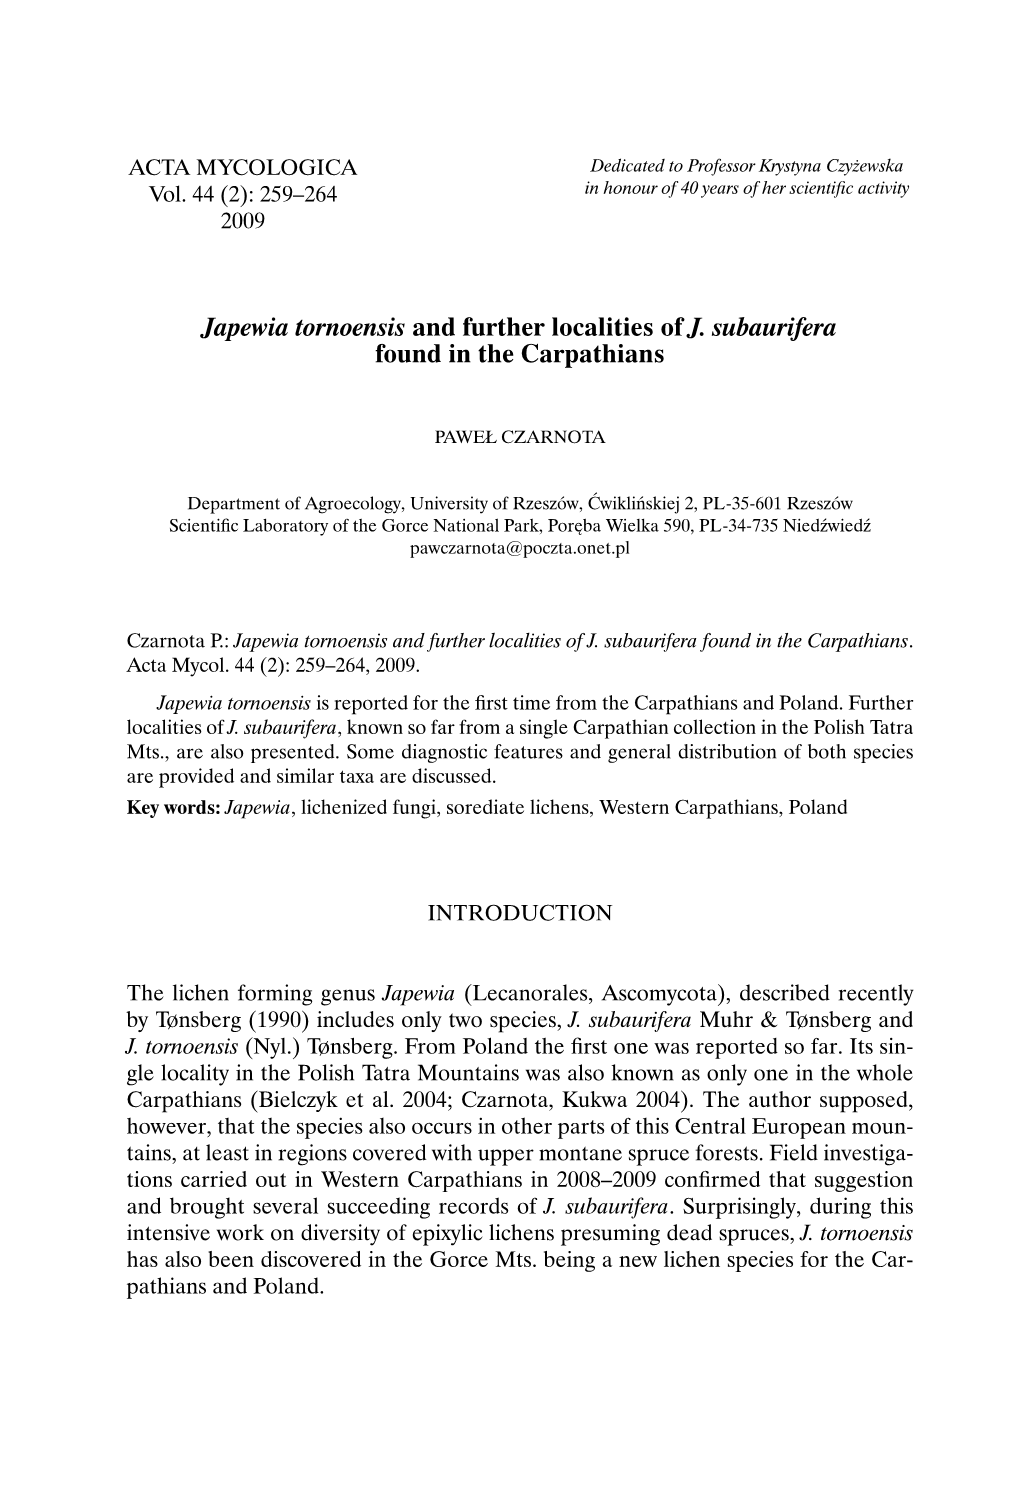 Japewia Tornoensis and Further Localities of J. Subaurifera Found in the Carpathians